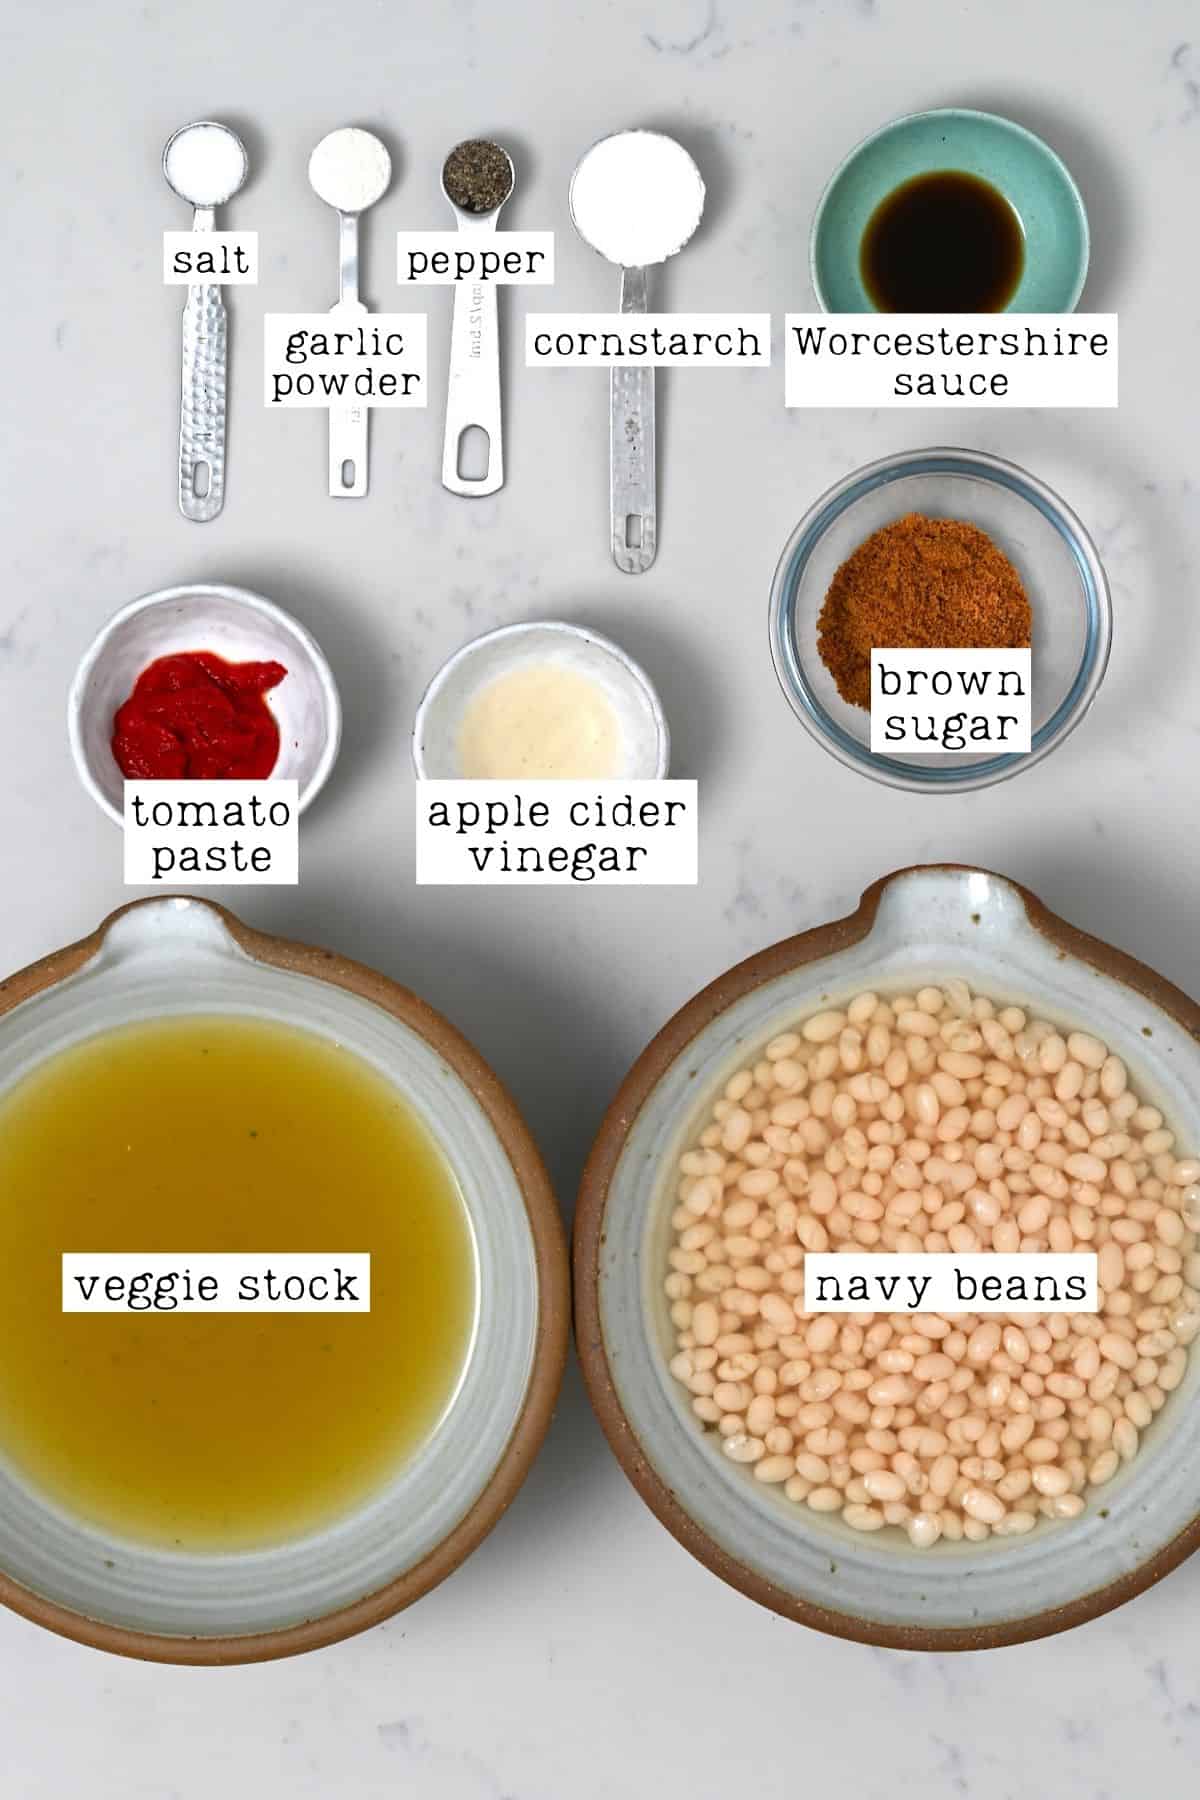 Ingredients for baked beans